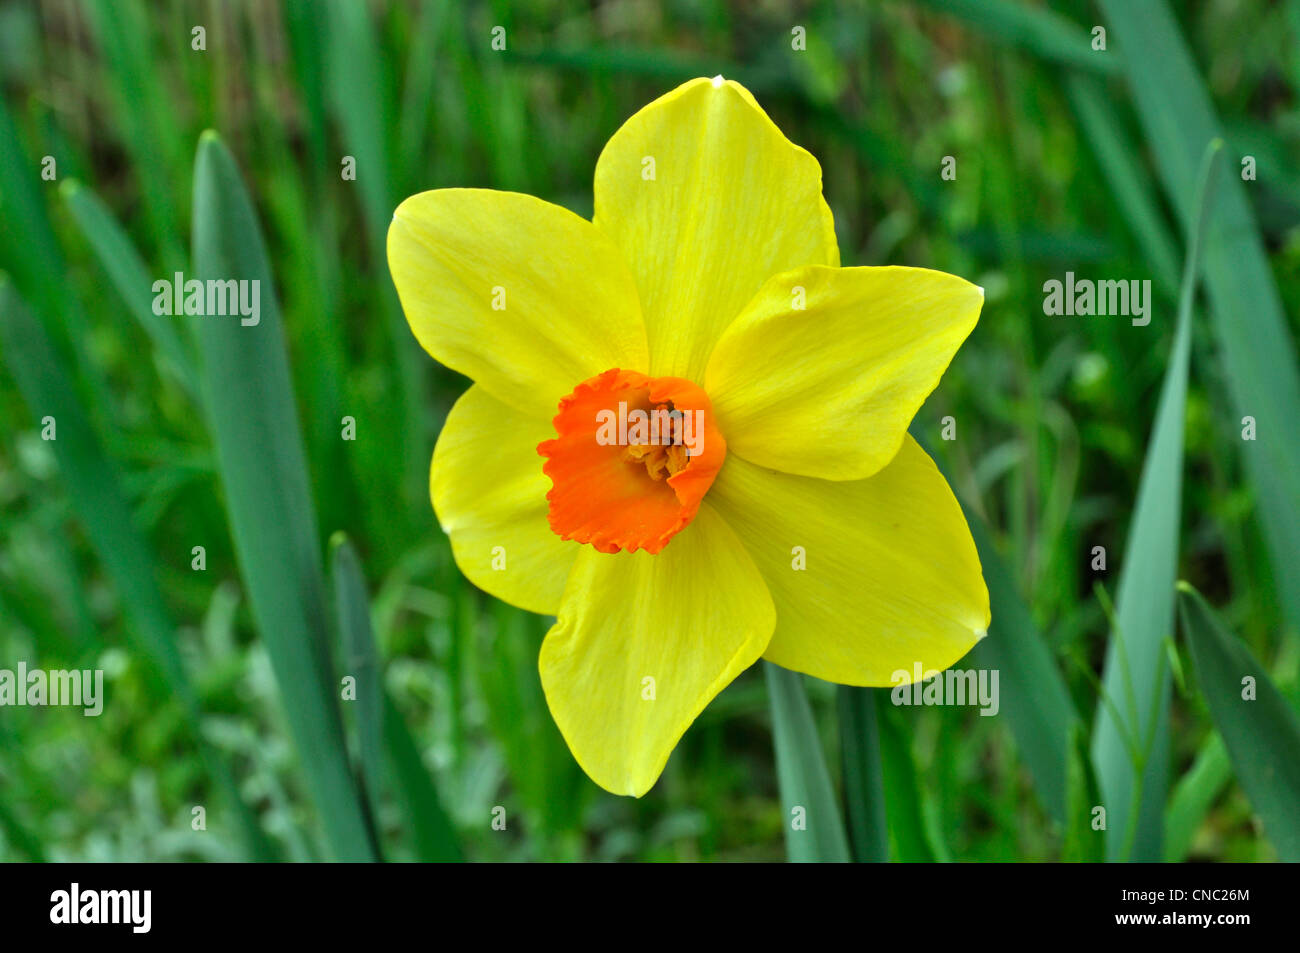 Yellow daffodil (narcissus) in bloom. Stock Photo